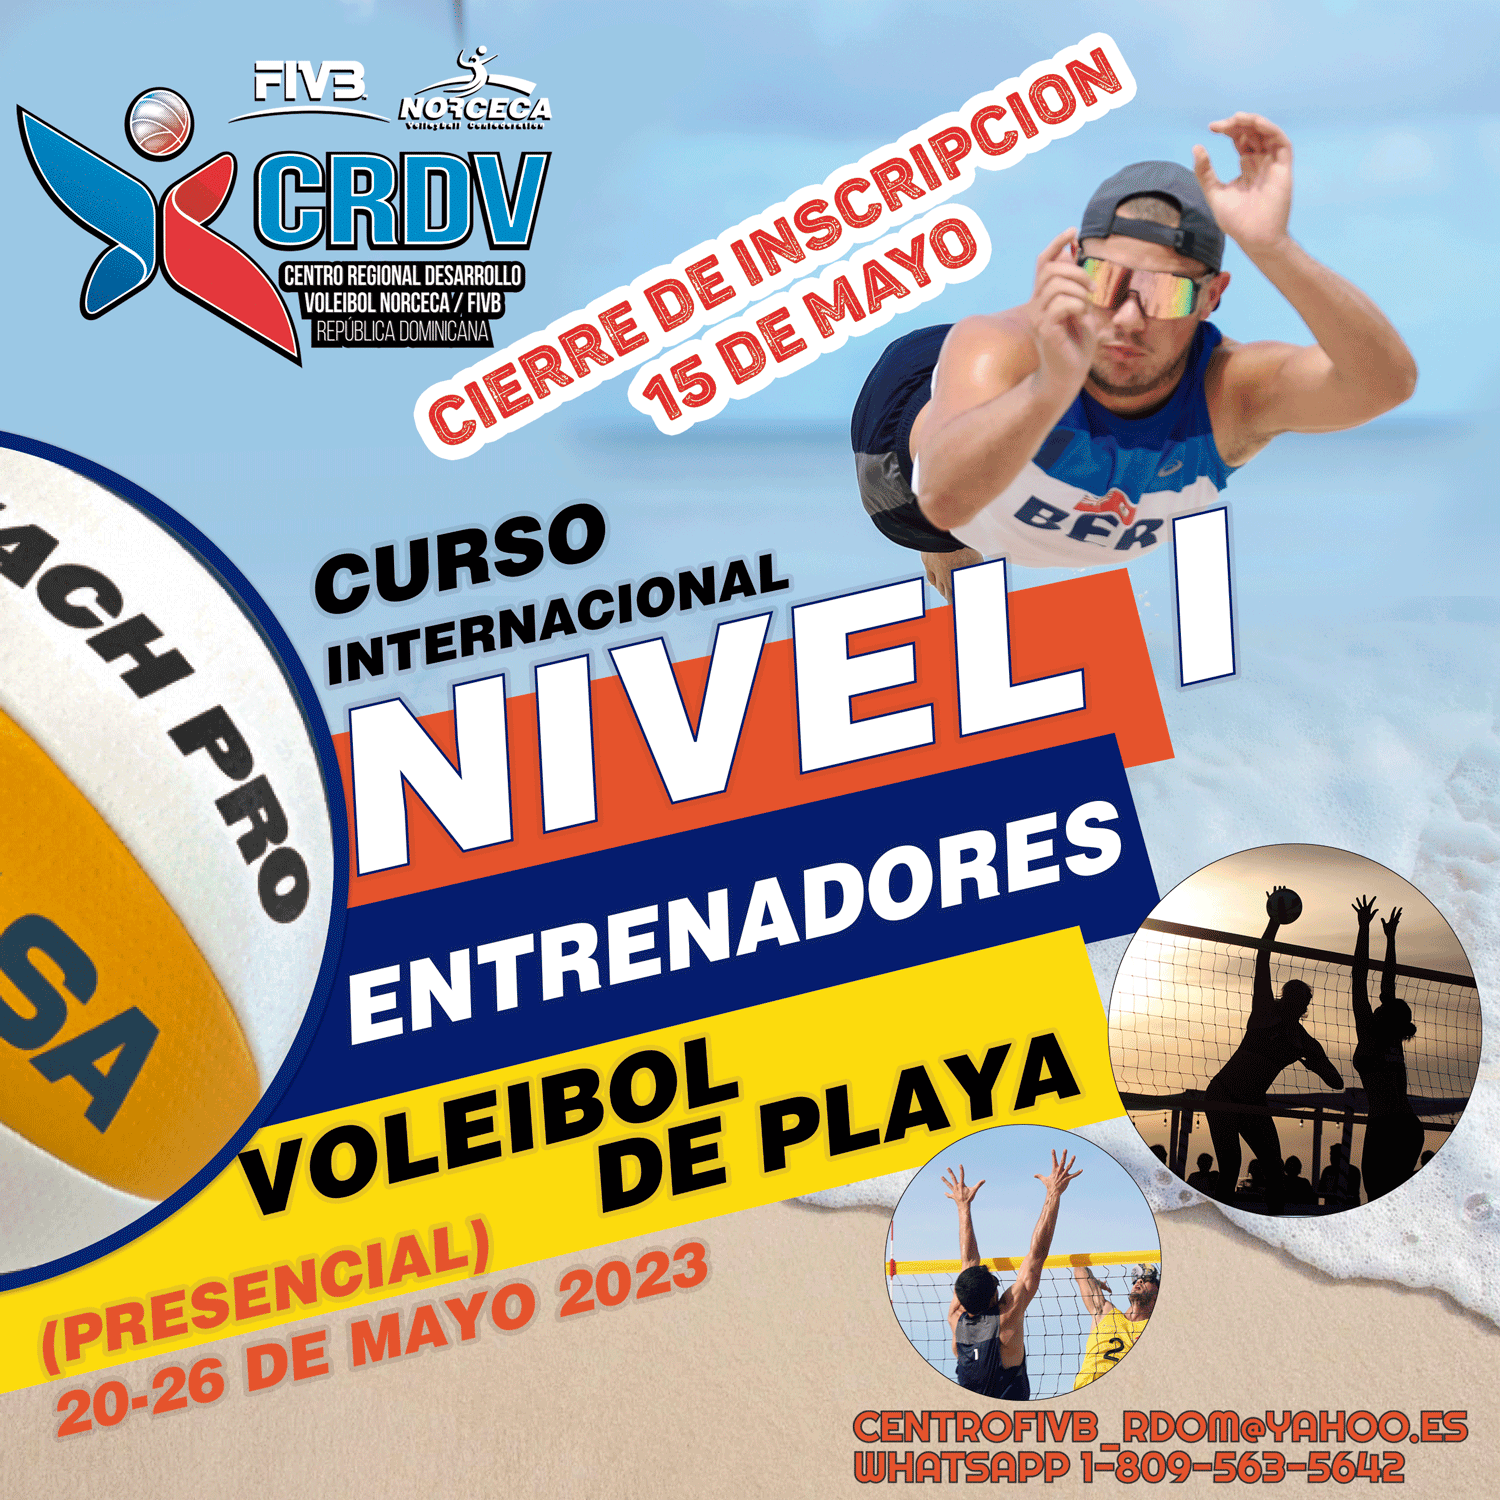 Upcoming Course for Level I Beach Volleyball Coaches